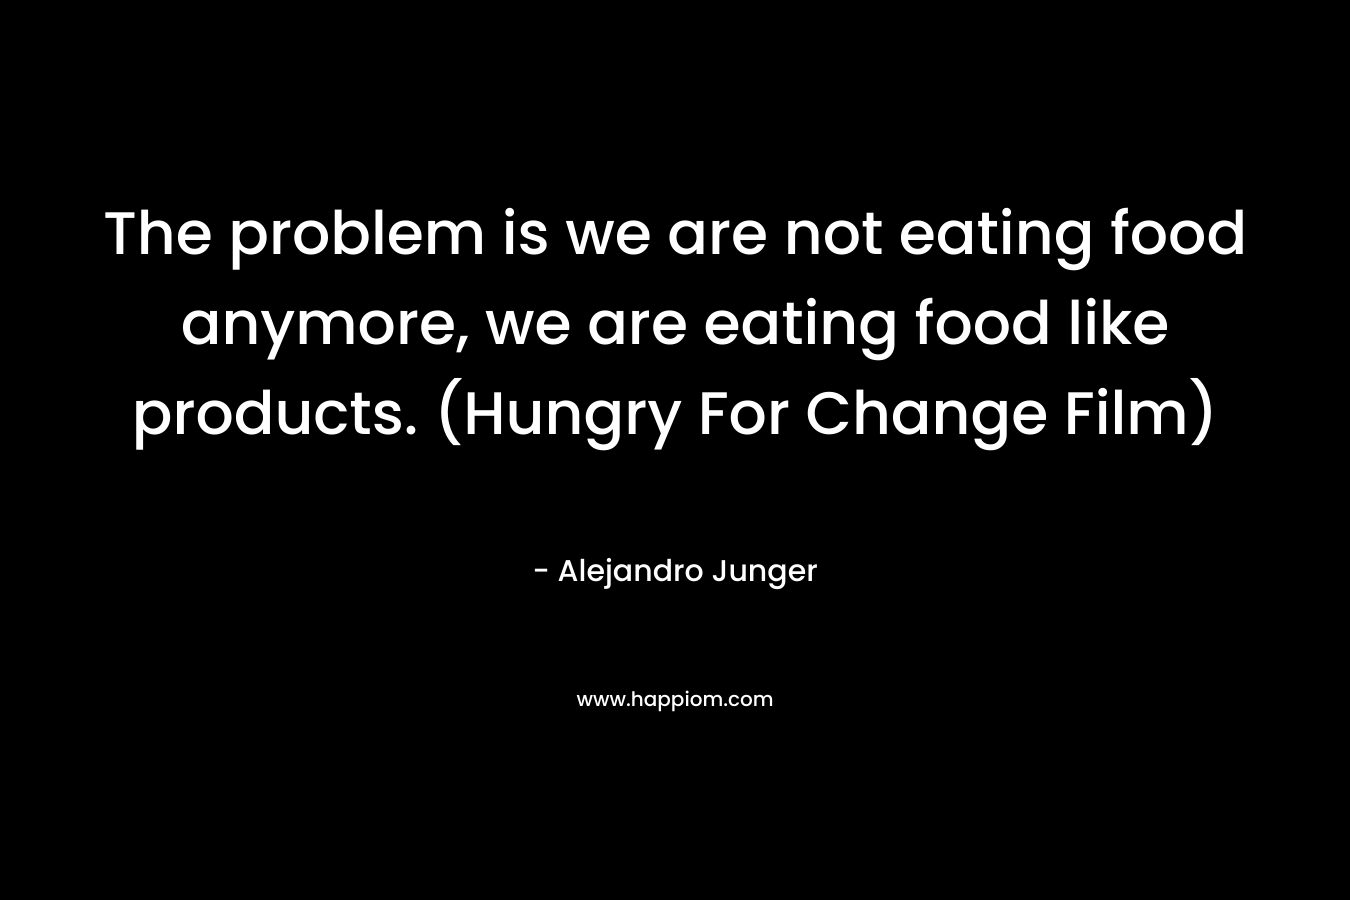 The problem is we are not eating food anymore, we are eating food like products. (Hungry For Change Film)